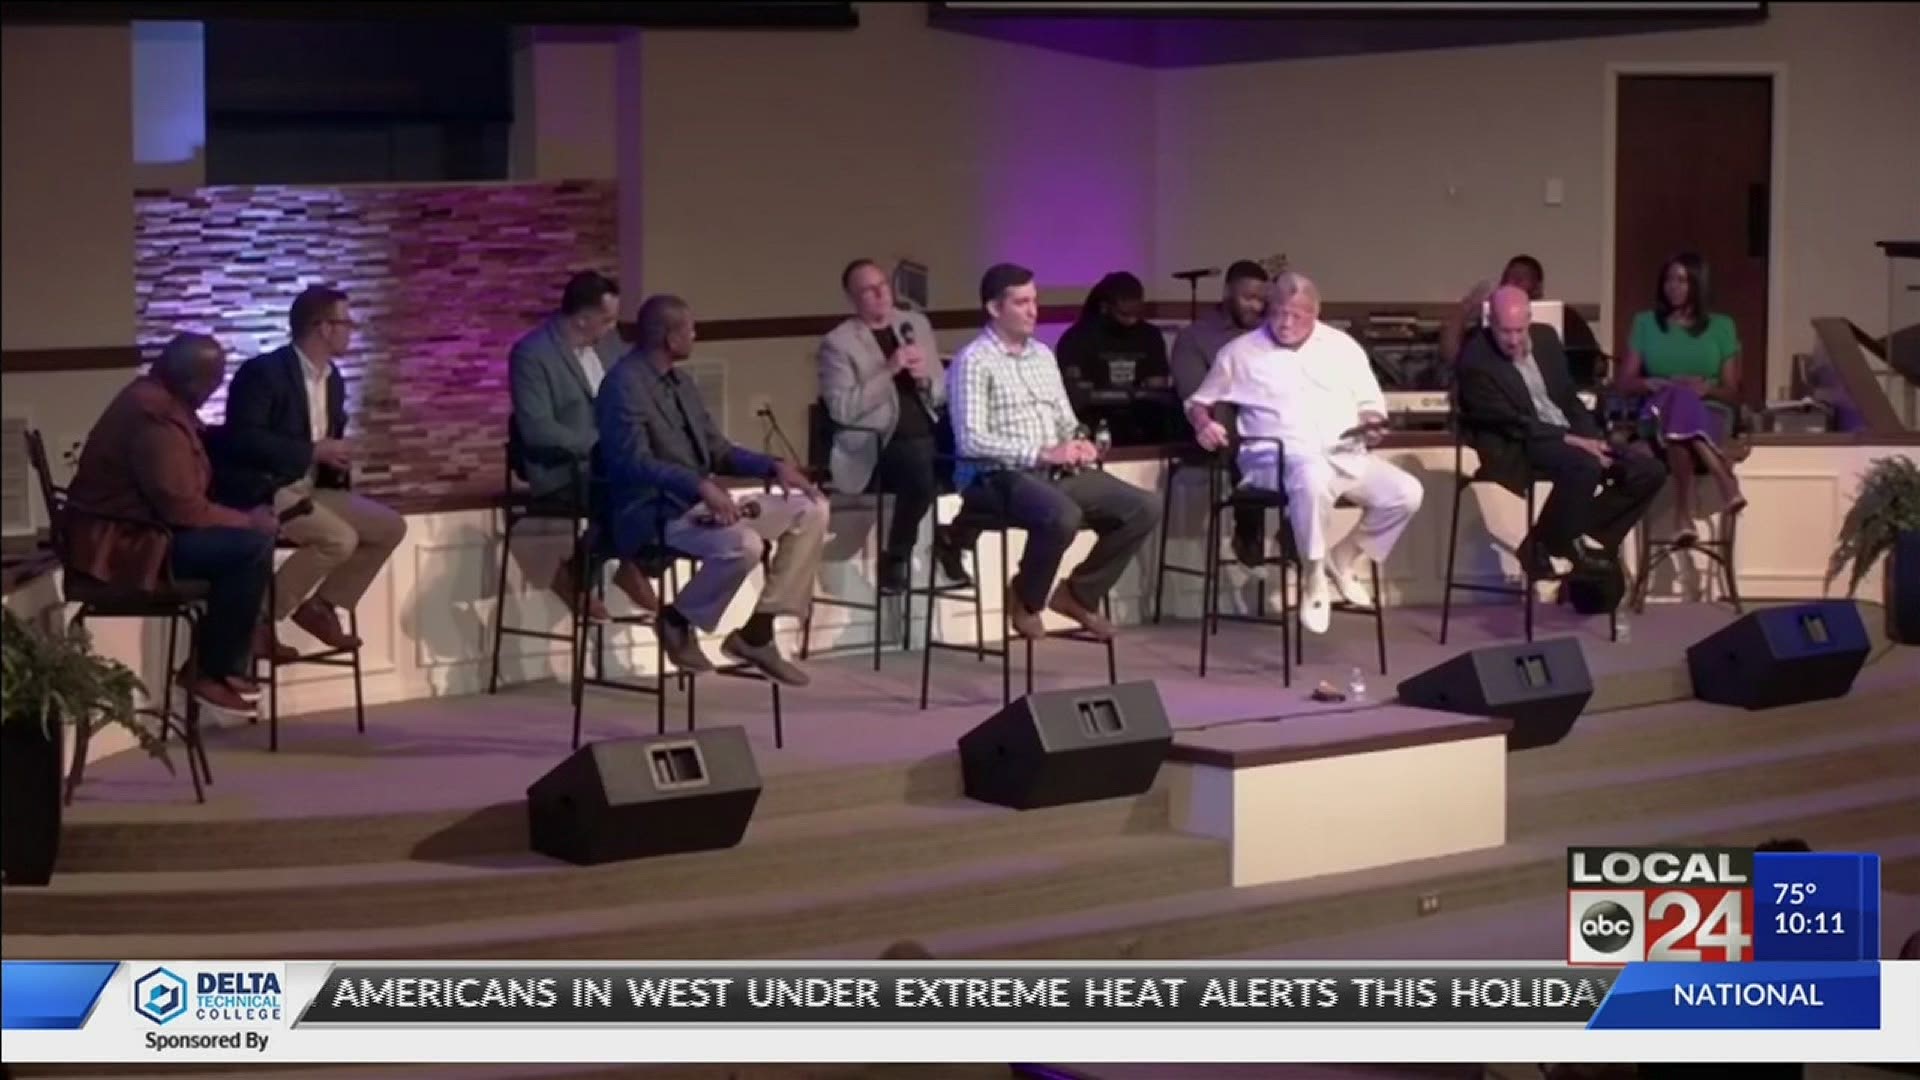 Local pastors talk about topics that can be minorities together.